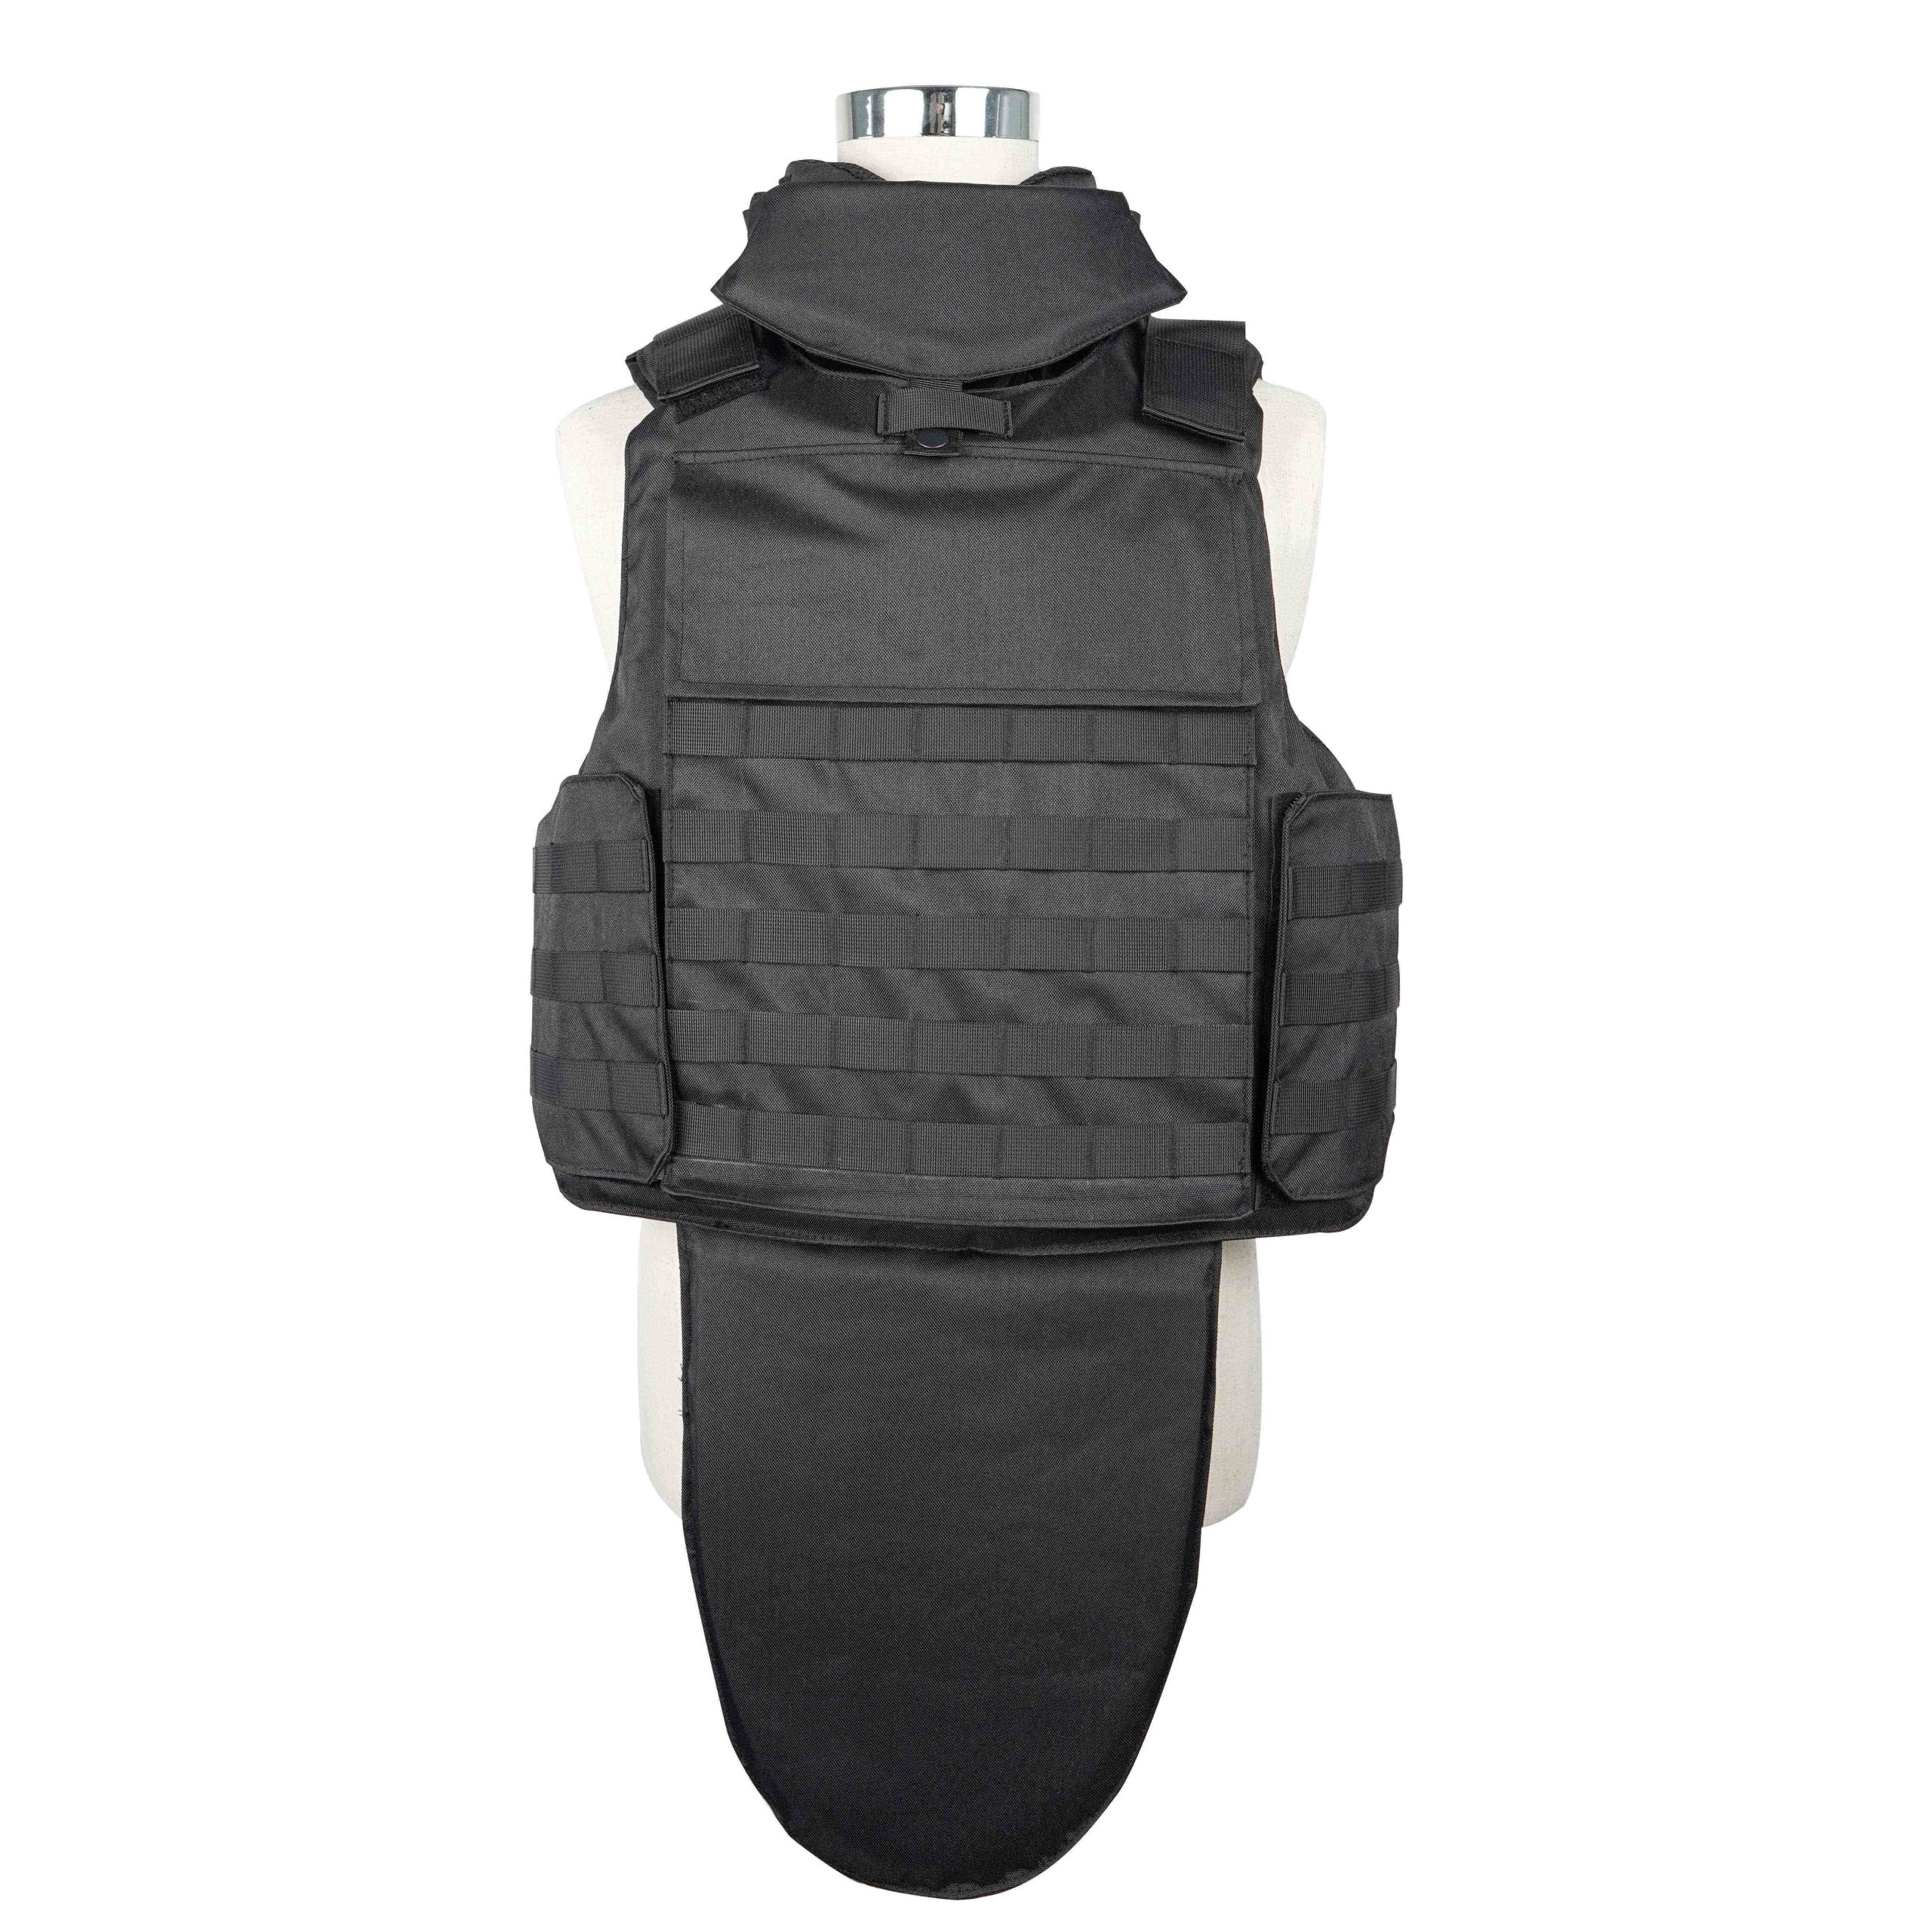 bullet proof vest fashion-quality material, made in china.